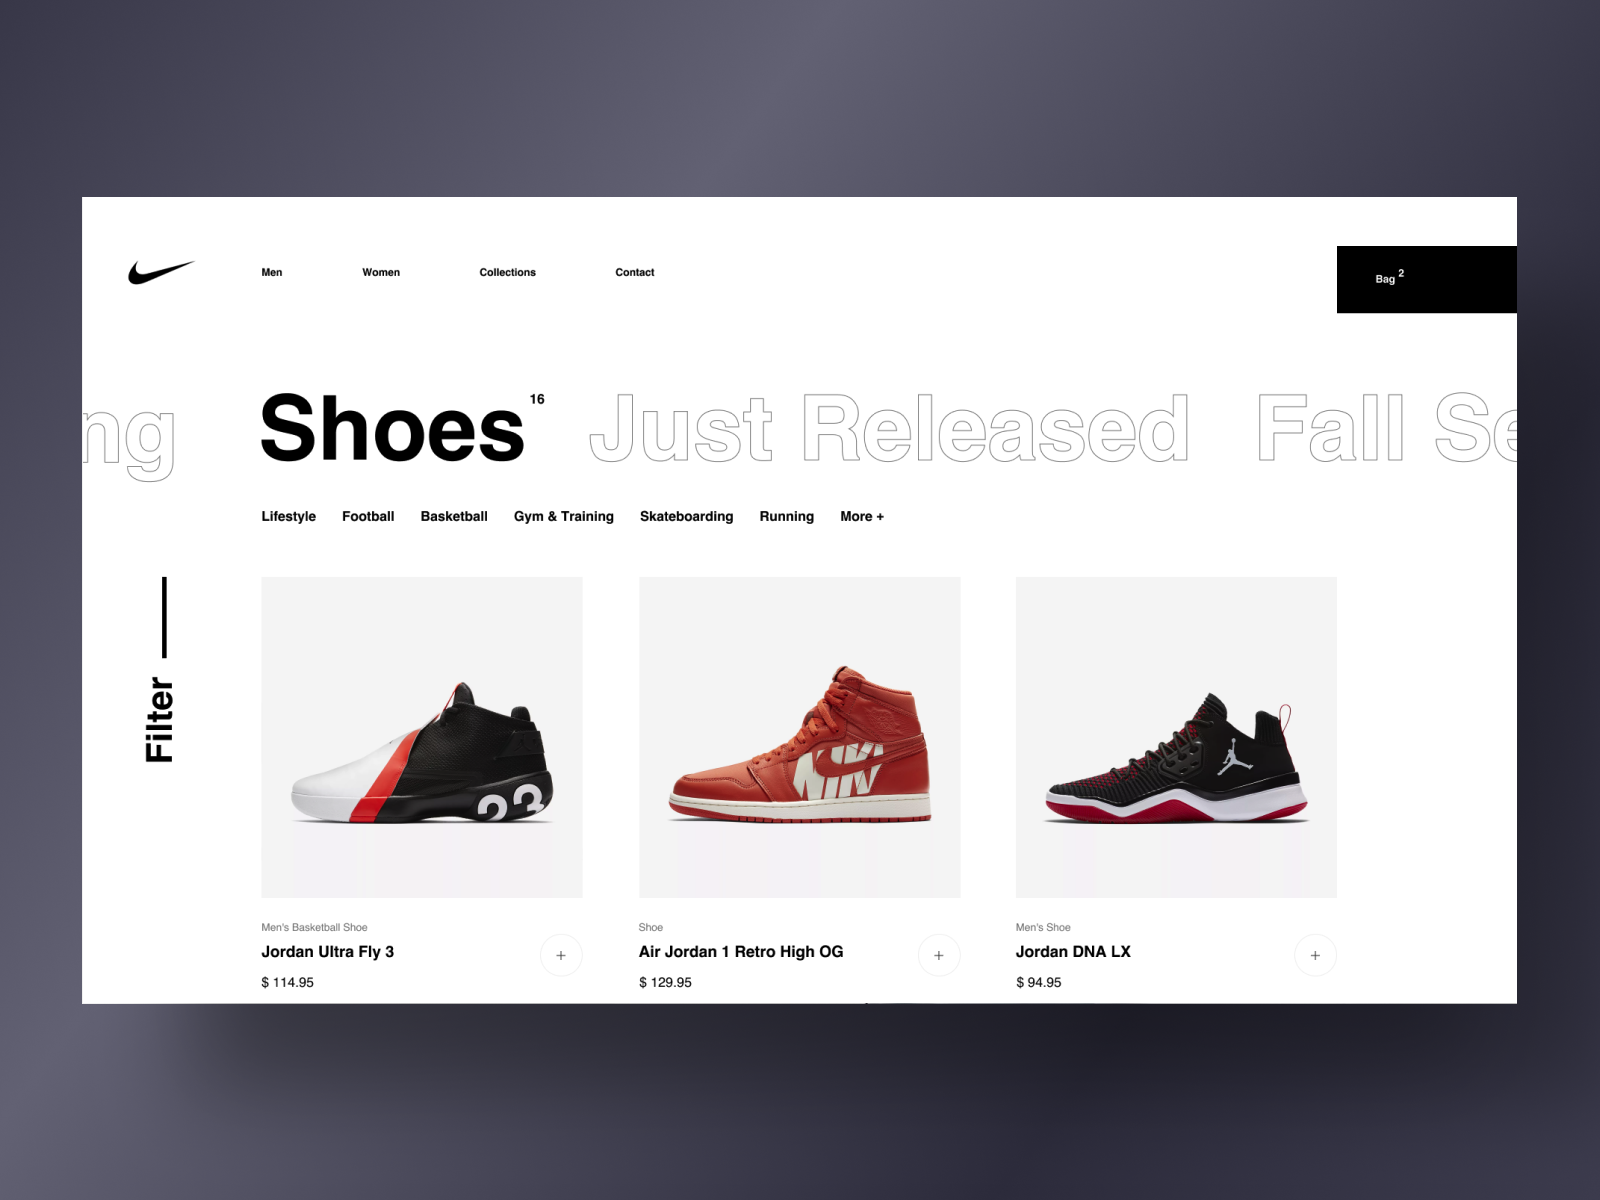 Dribbble - nike_acg.png by Alexandr Kotelevets